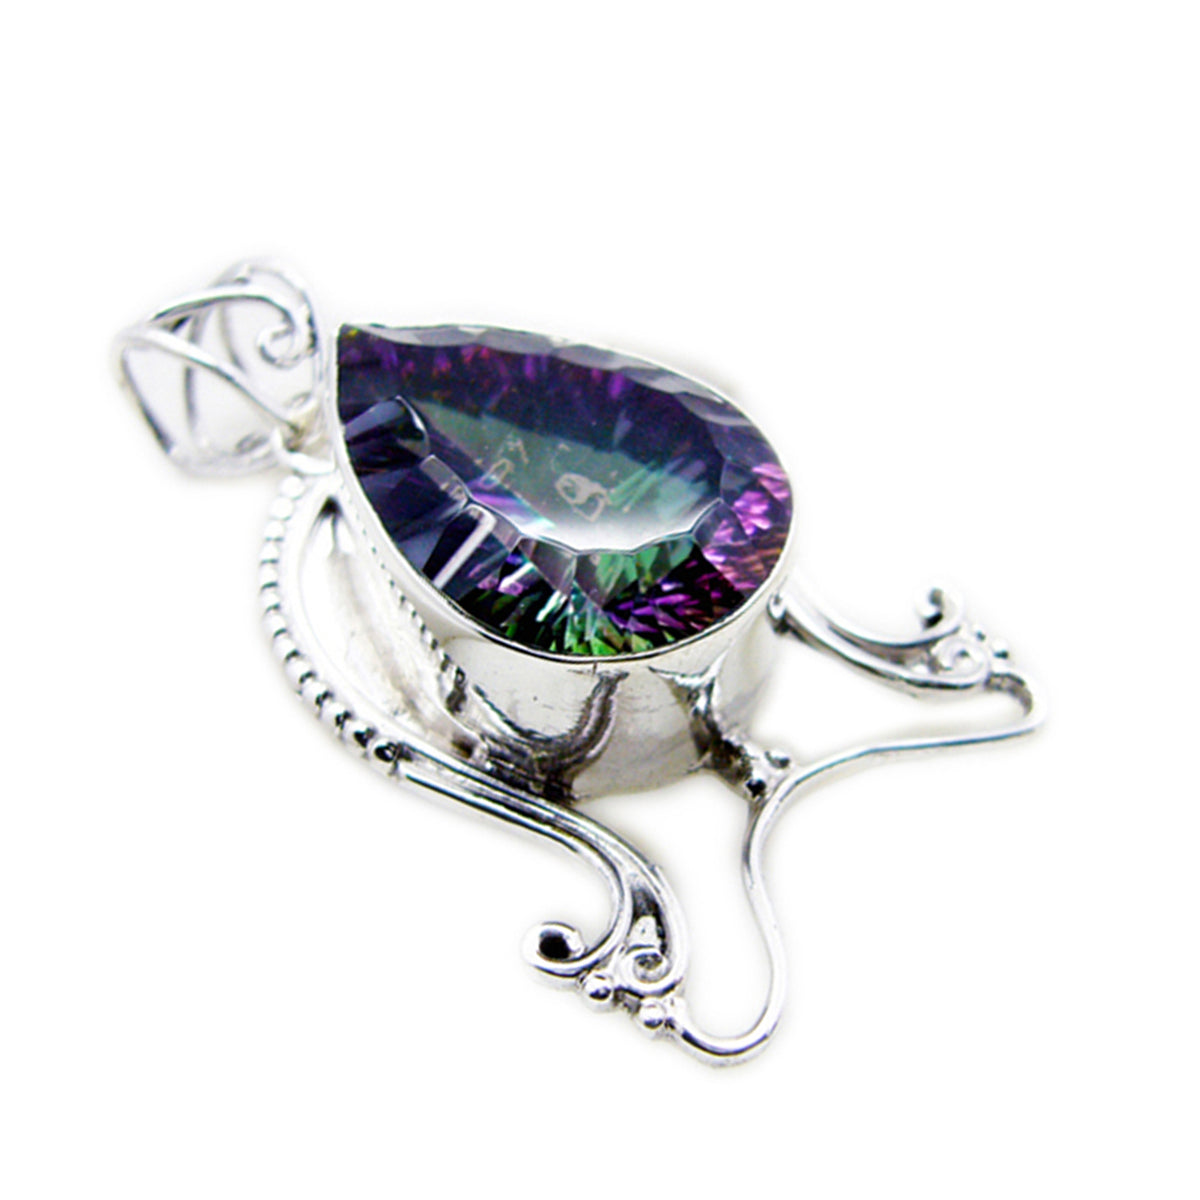 Riyo Comely Gems Pear Faceted Multi Color Mystic Quartz Solid Silver Pendant Gift For Wedding